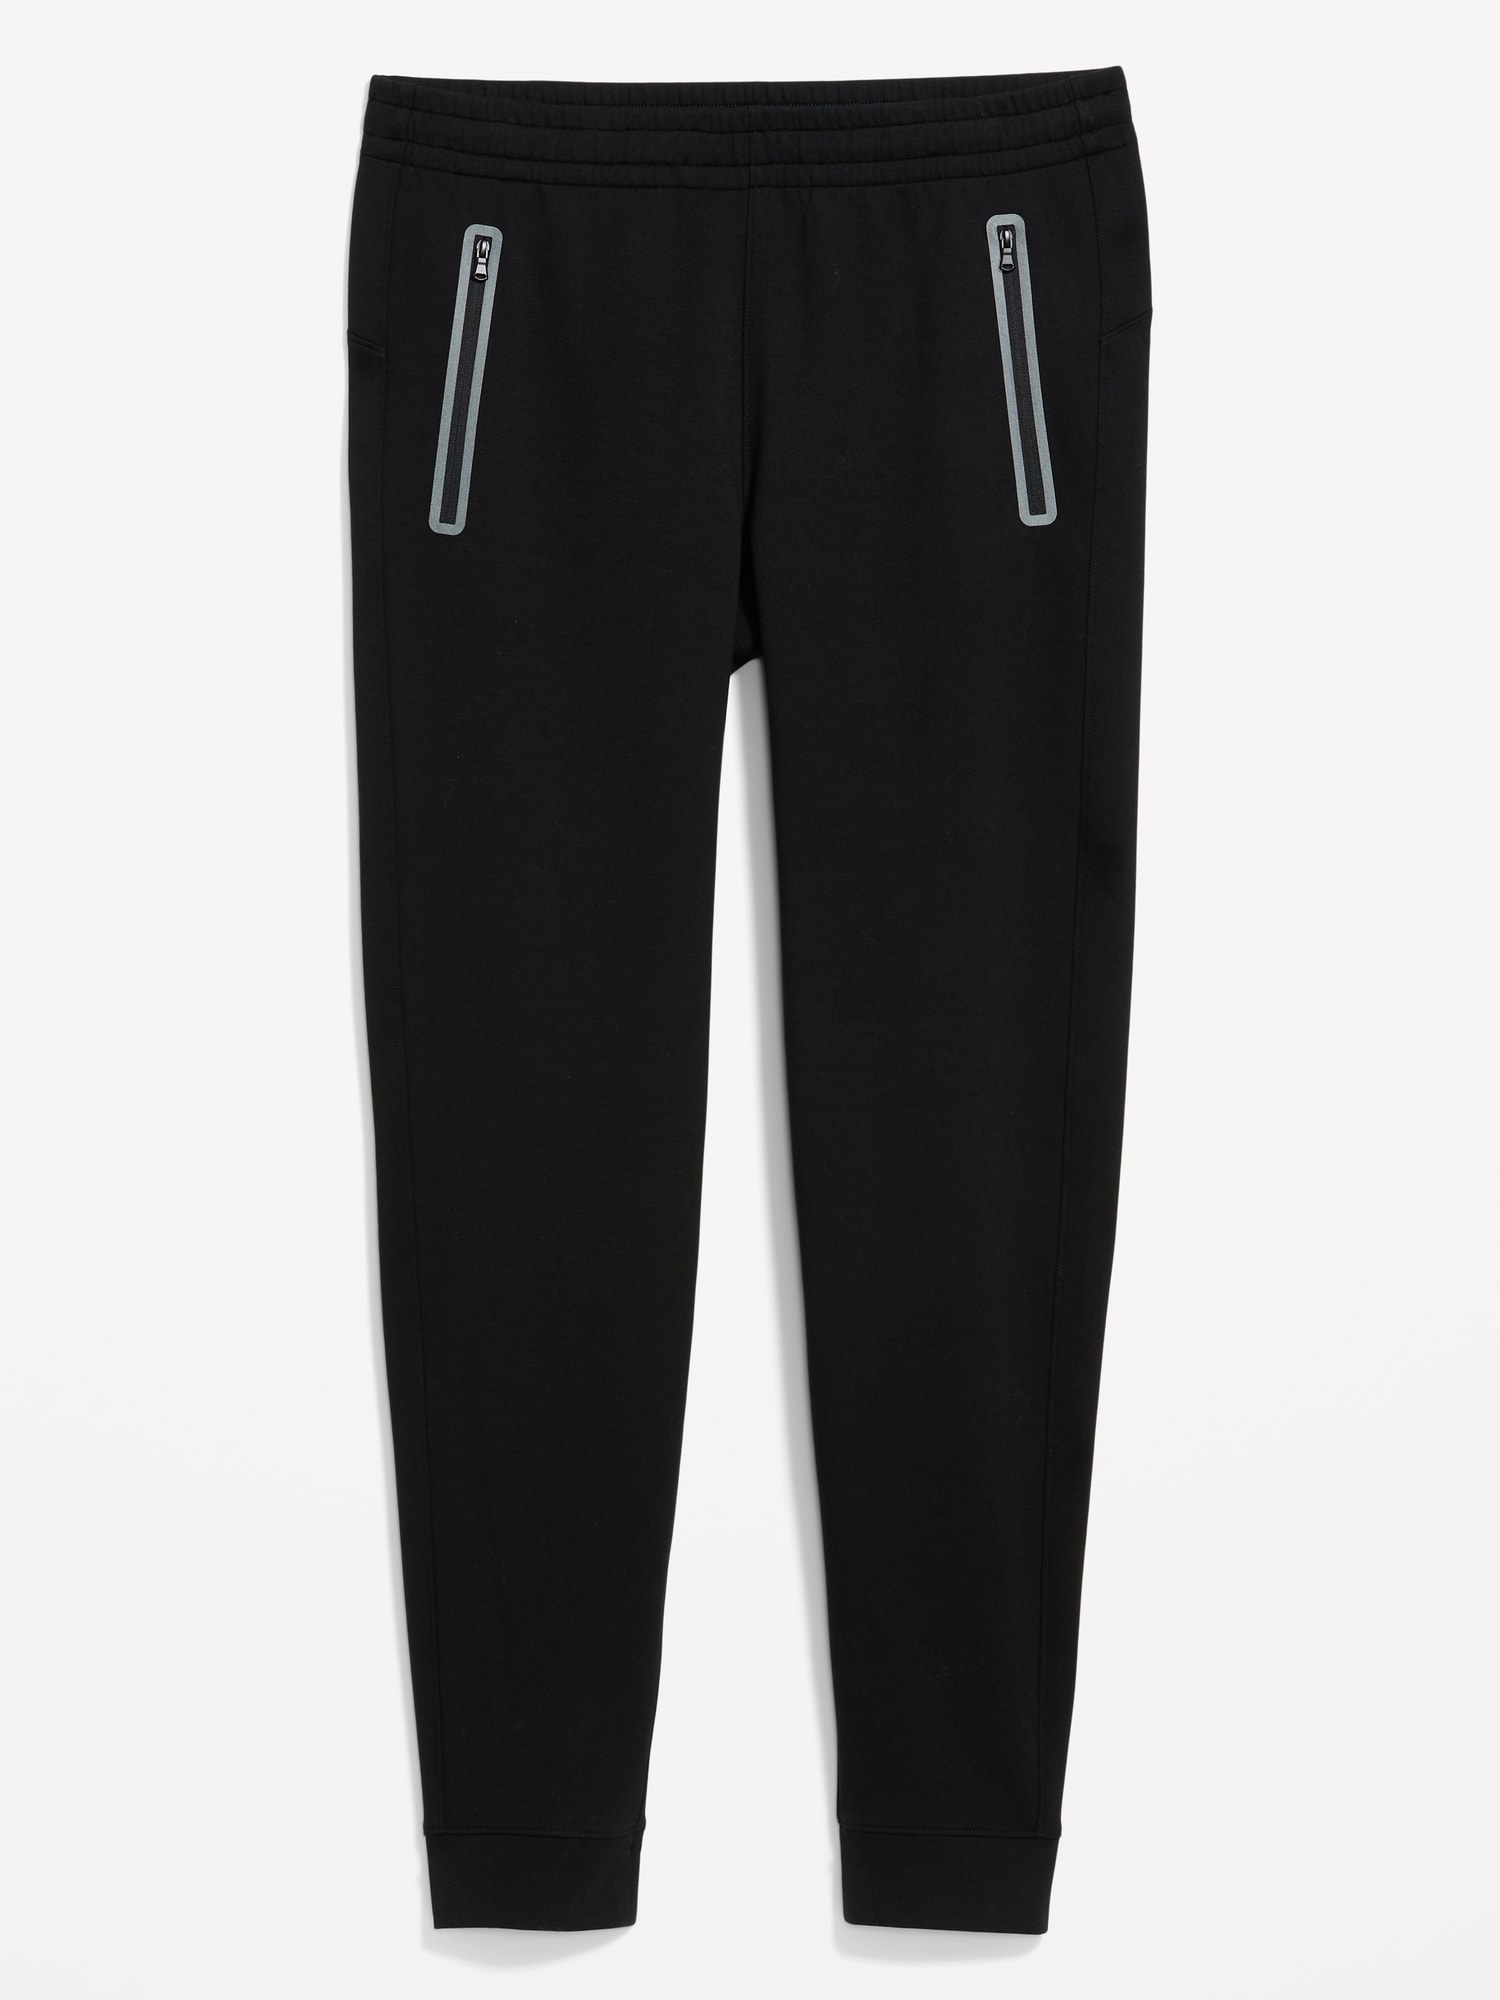 Old Navy Dynamic Cinch Pintucked Sweatpants, Pants